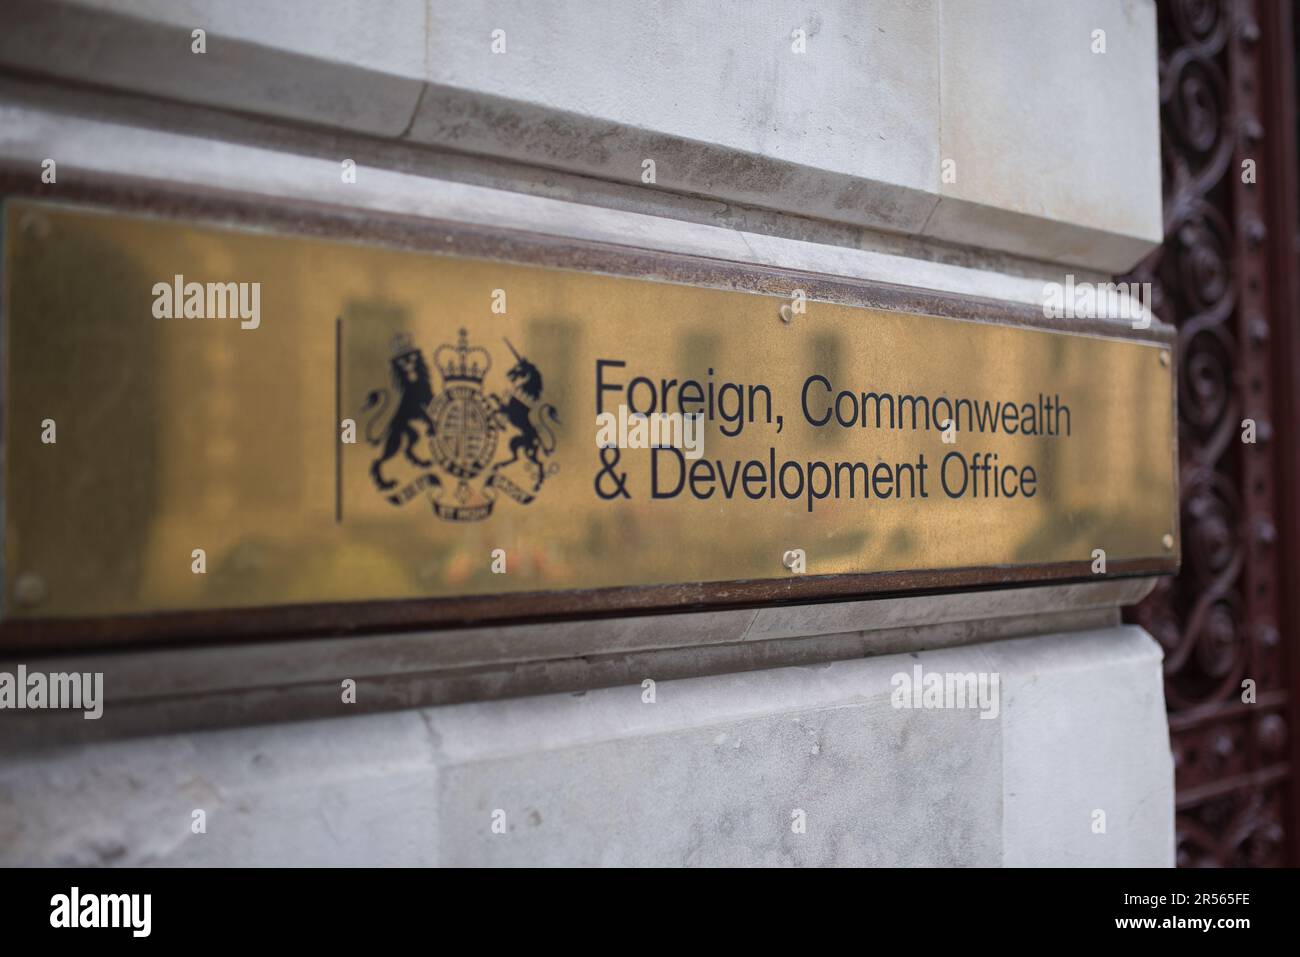 Foreign, Commonwealth and Development Office in London, United Kingdom. Stock Photo